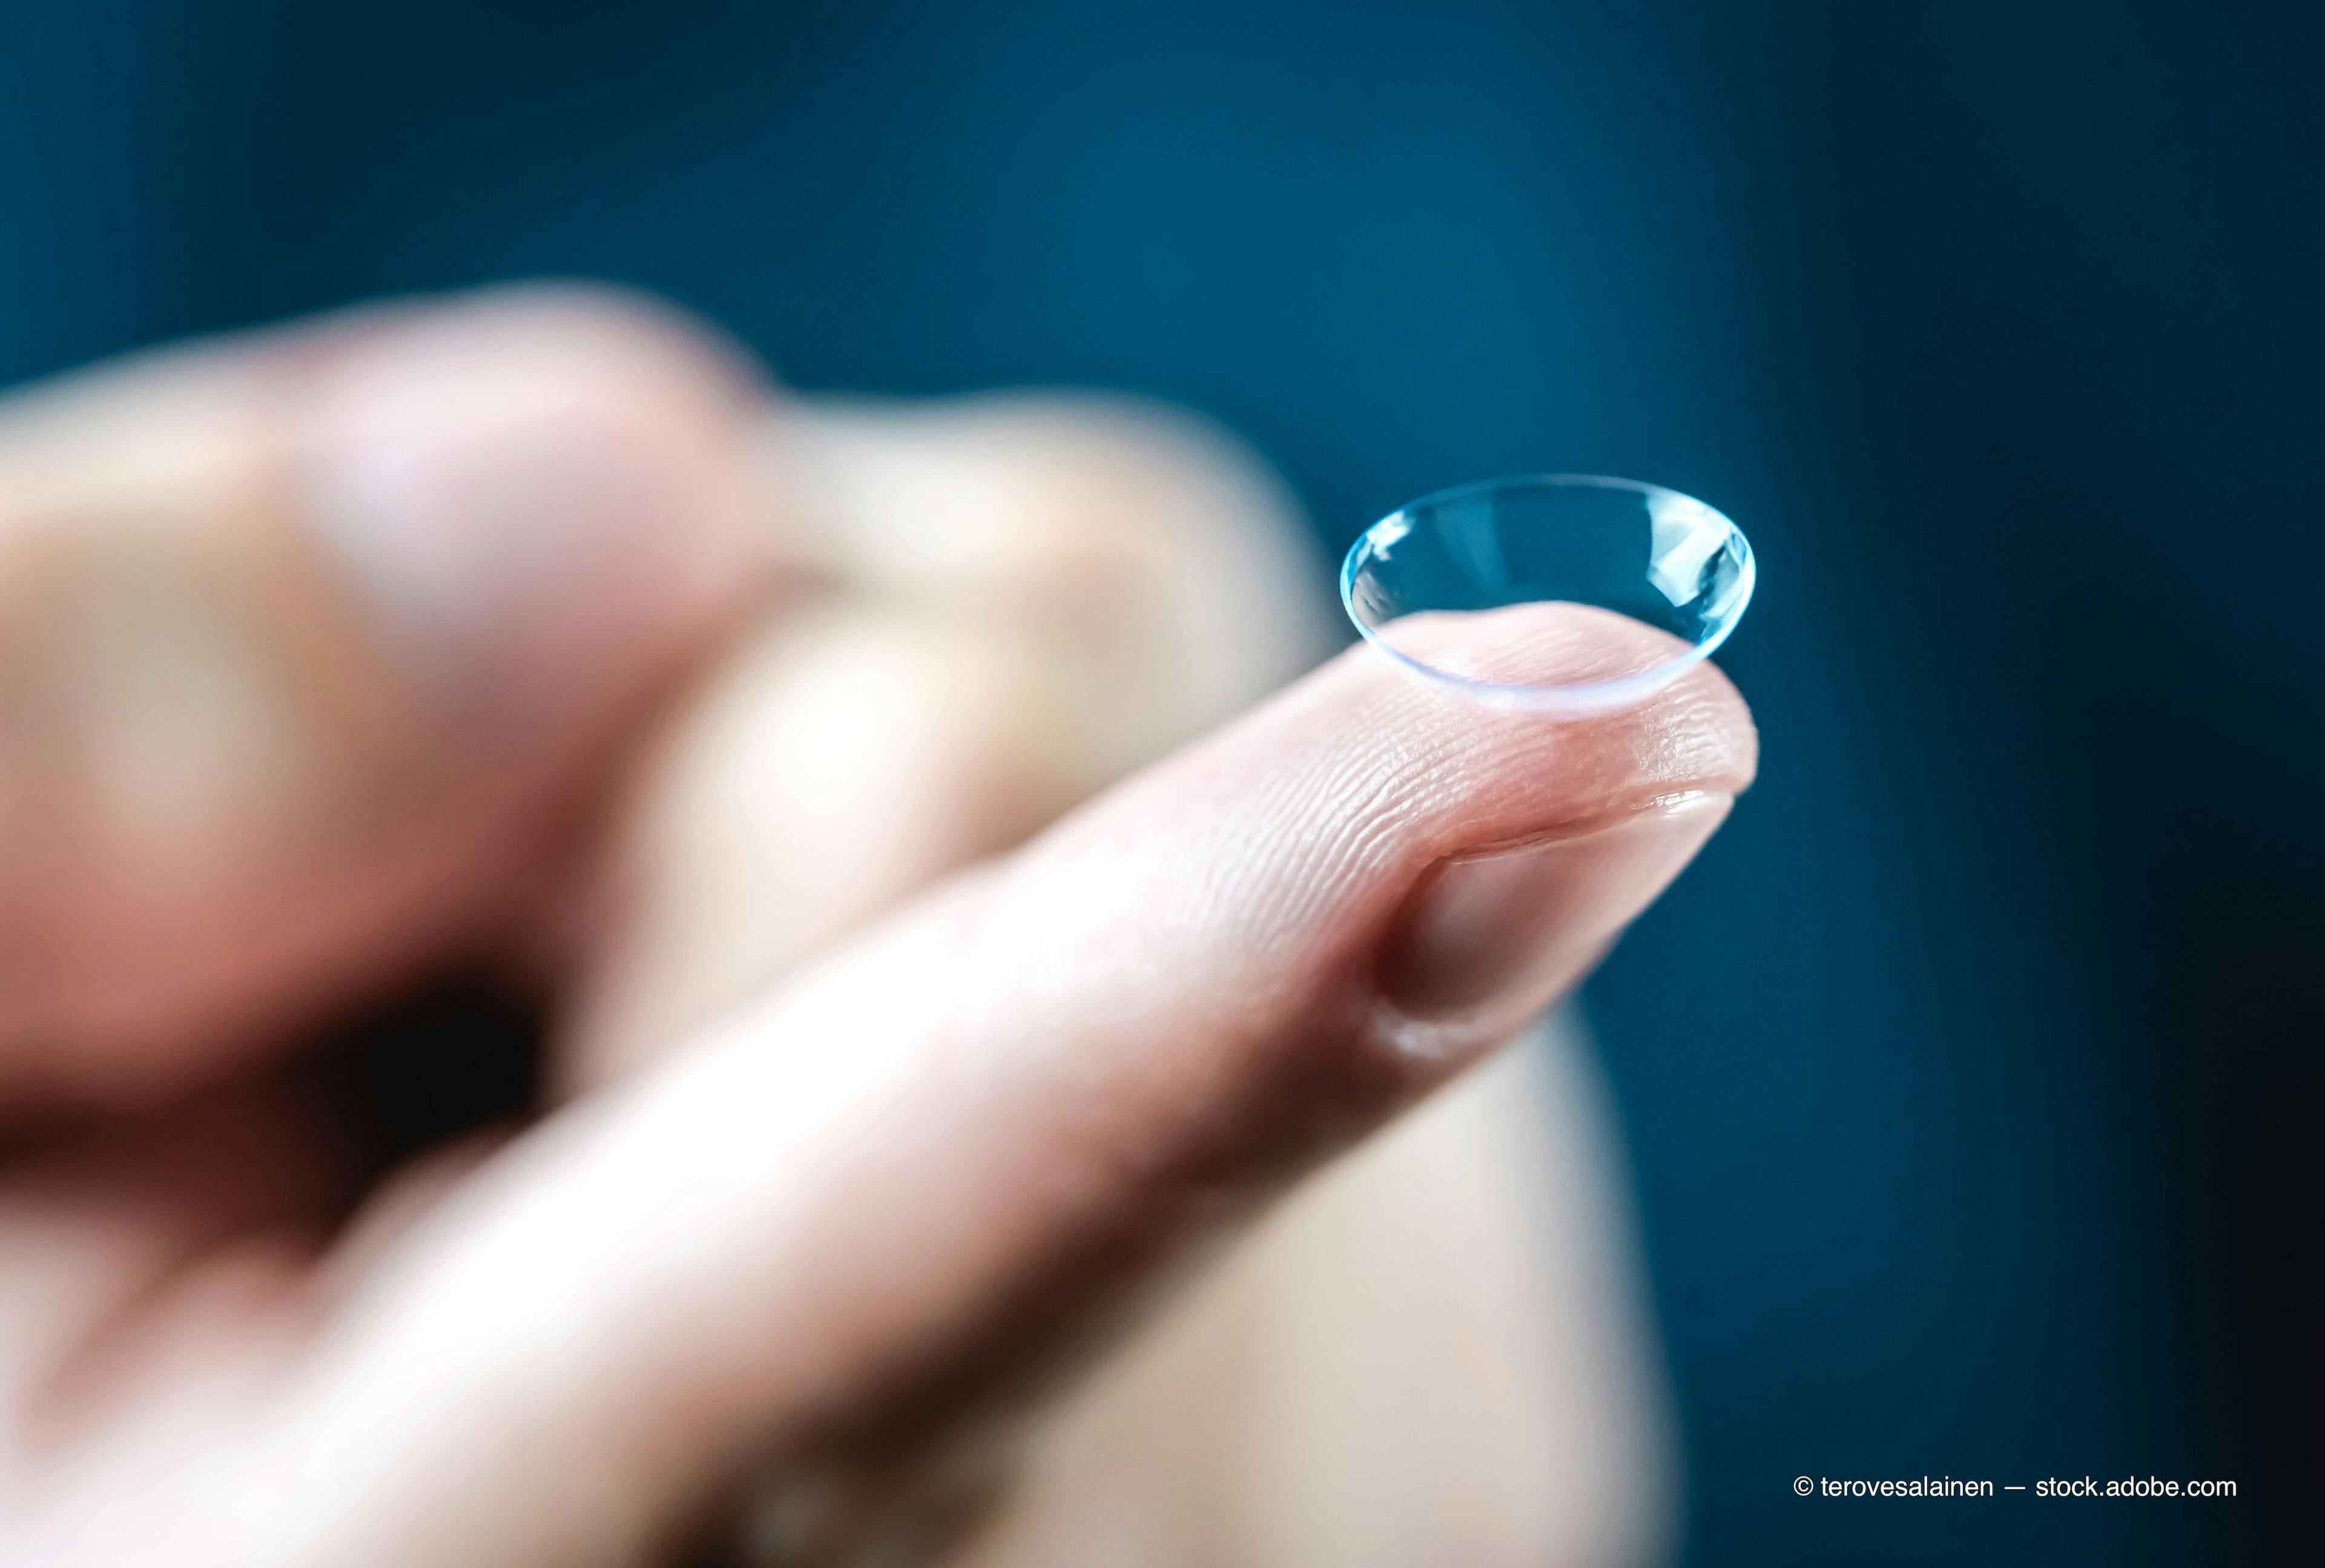 Video: Why contact lens wearers should use hydrogen peroxide